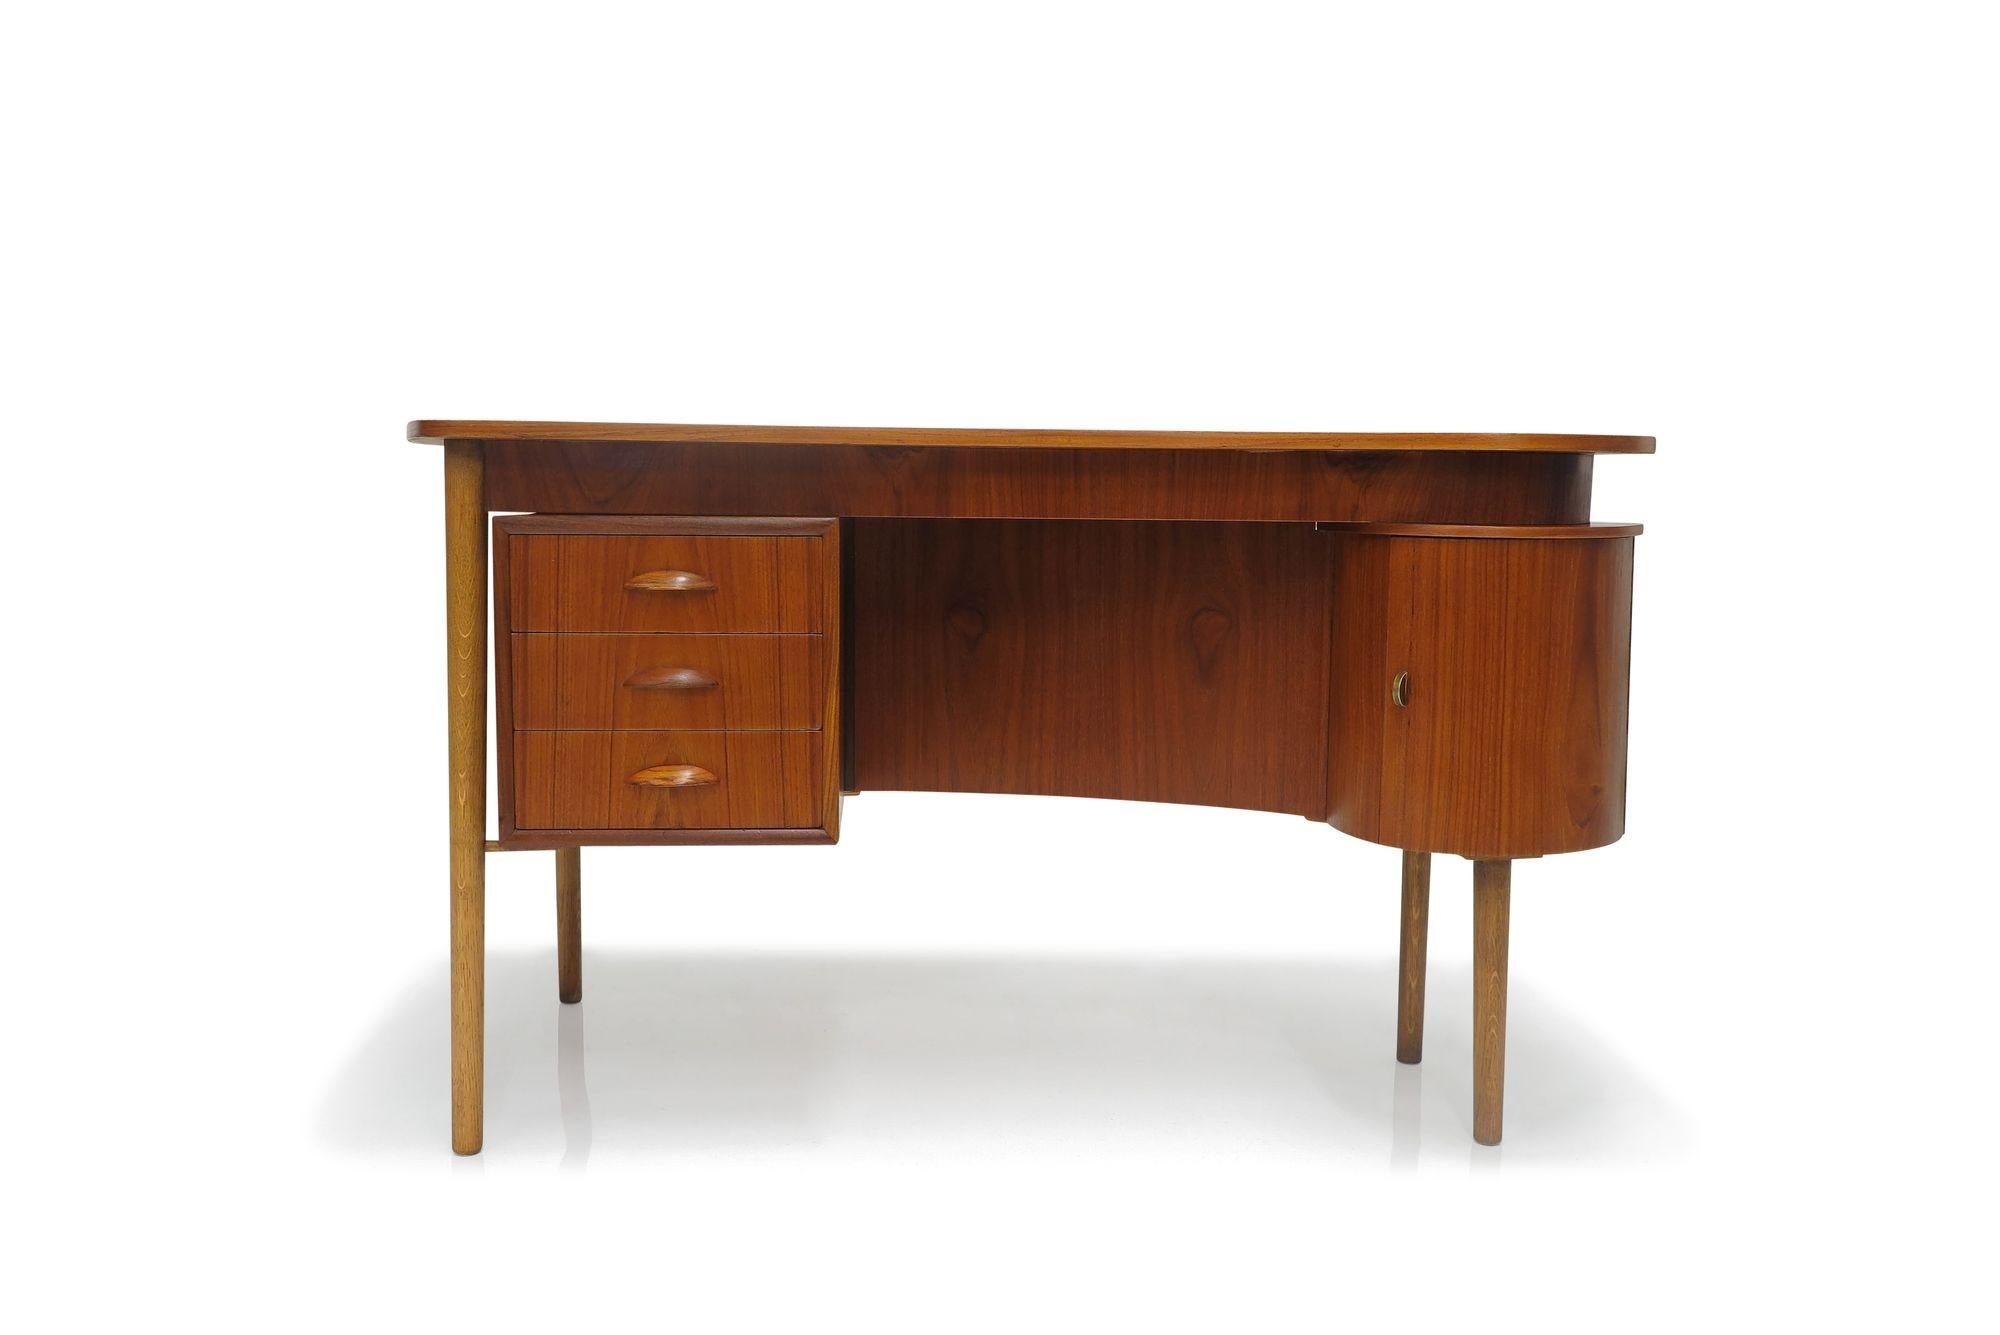 Mid-century teak desk designed by Kai Kristiansen, circa 1959, in Denmark.
The desk is crafted of teak, with a curved top surface, a series of three drawers with carved pulls, a right-side cabinet with a shelf, and a book shelf on the back side of